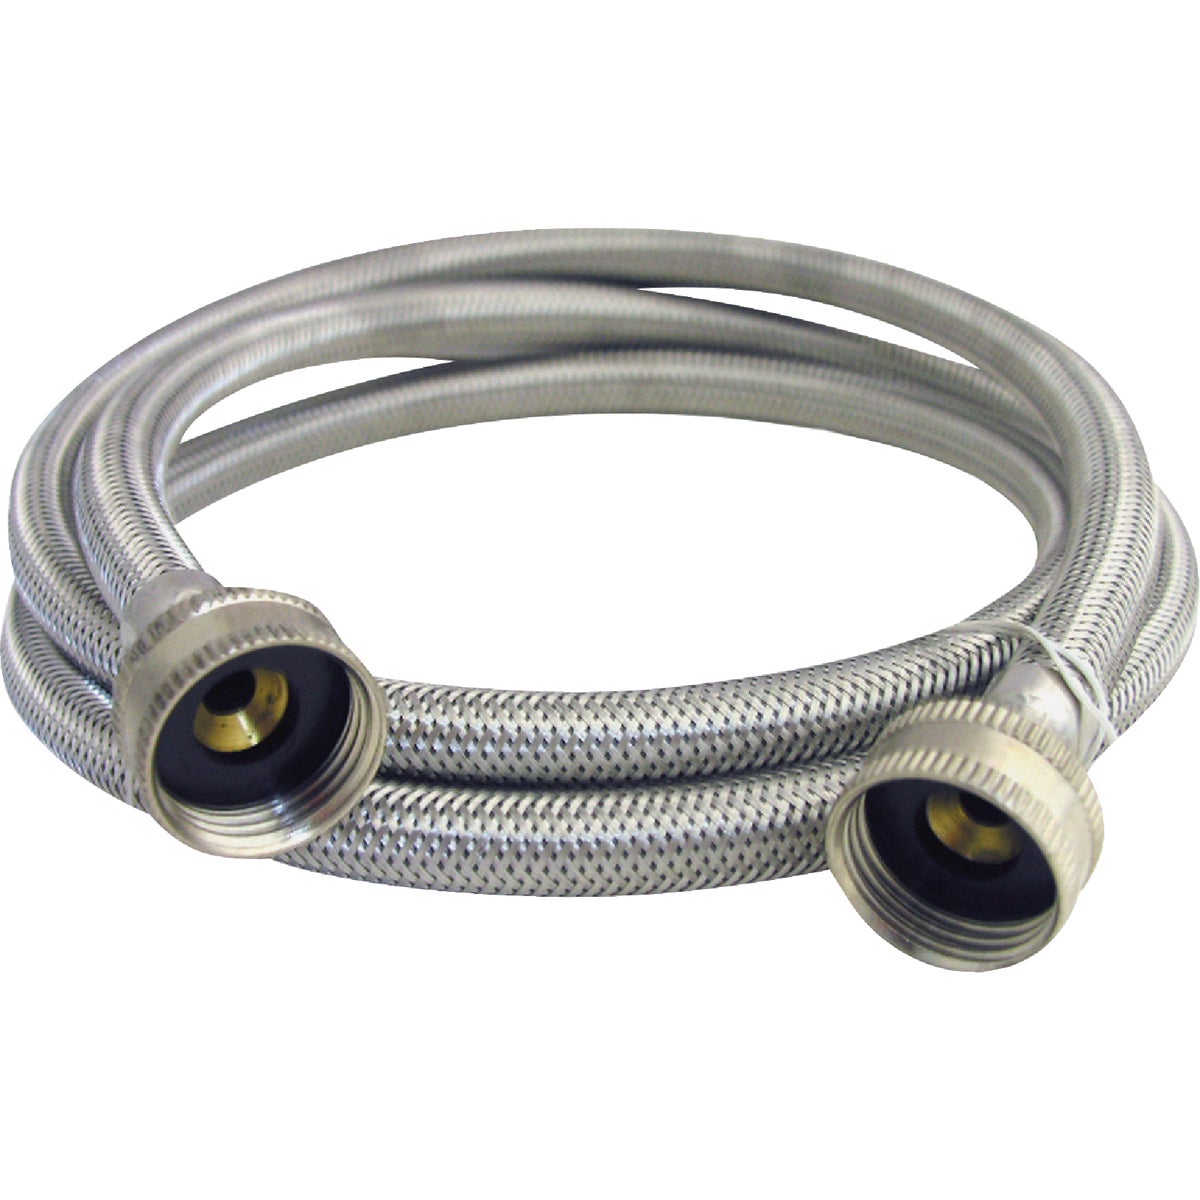 Lasco 3/4 In. x 4 Ft. Stainless Steel Washing Machine Hose